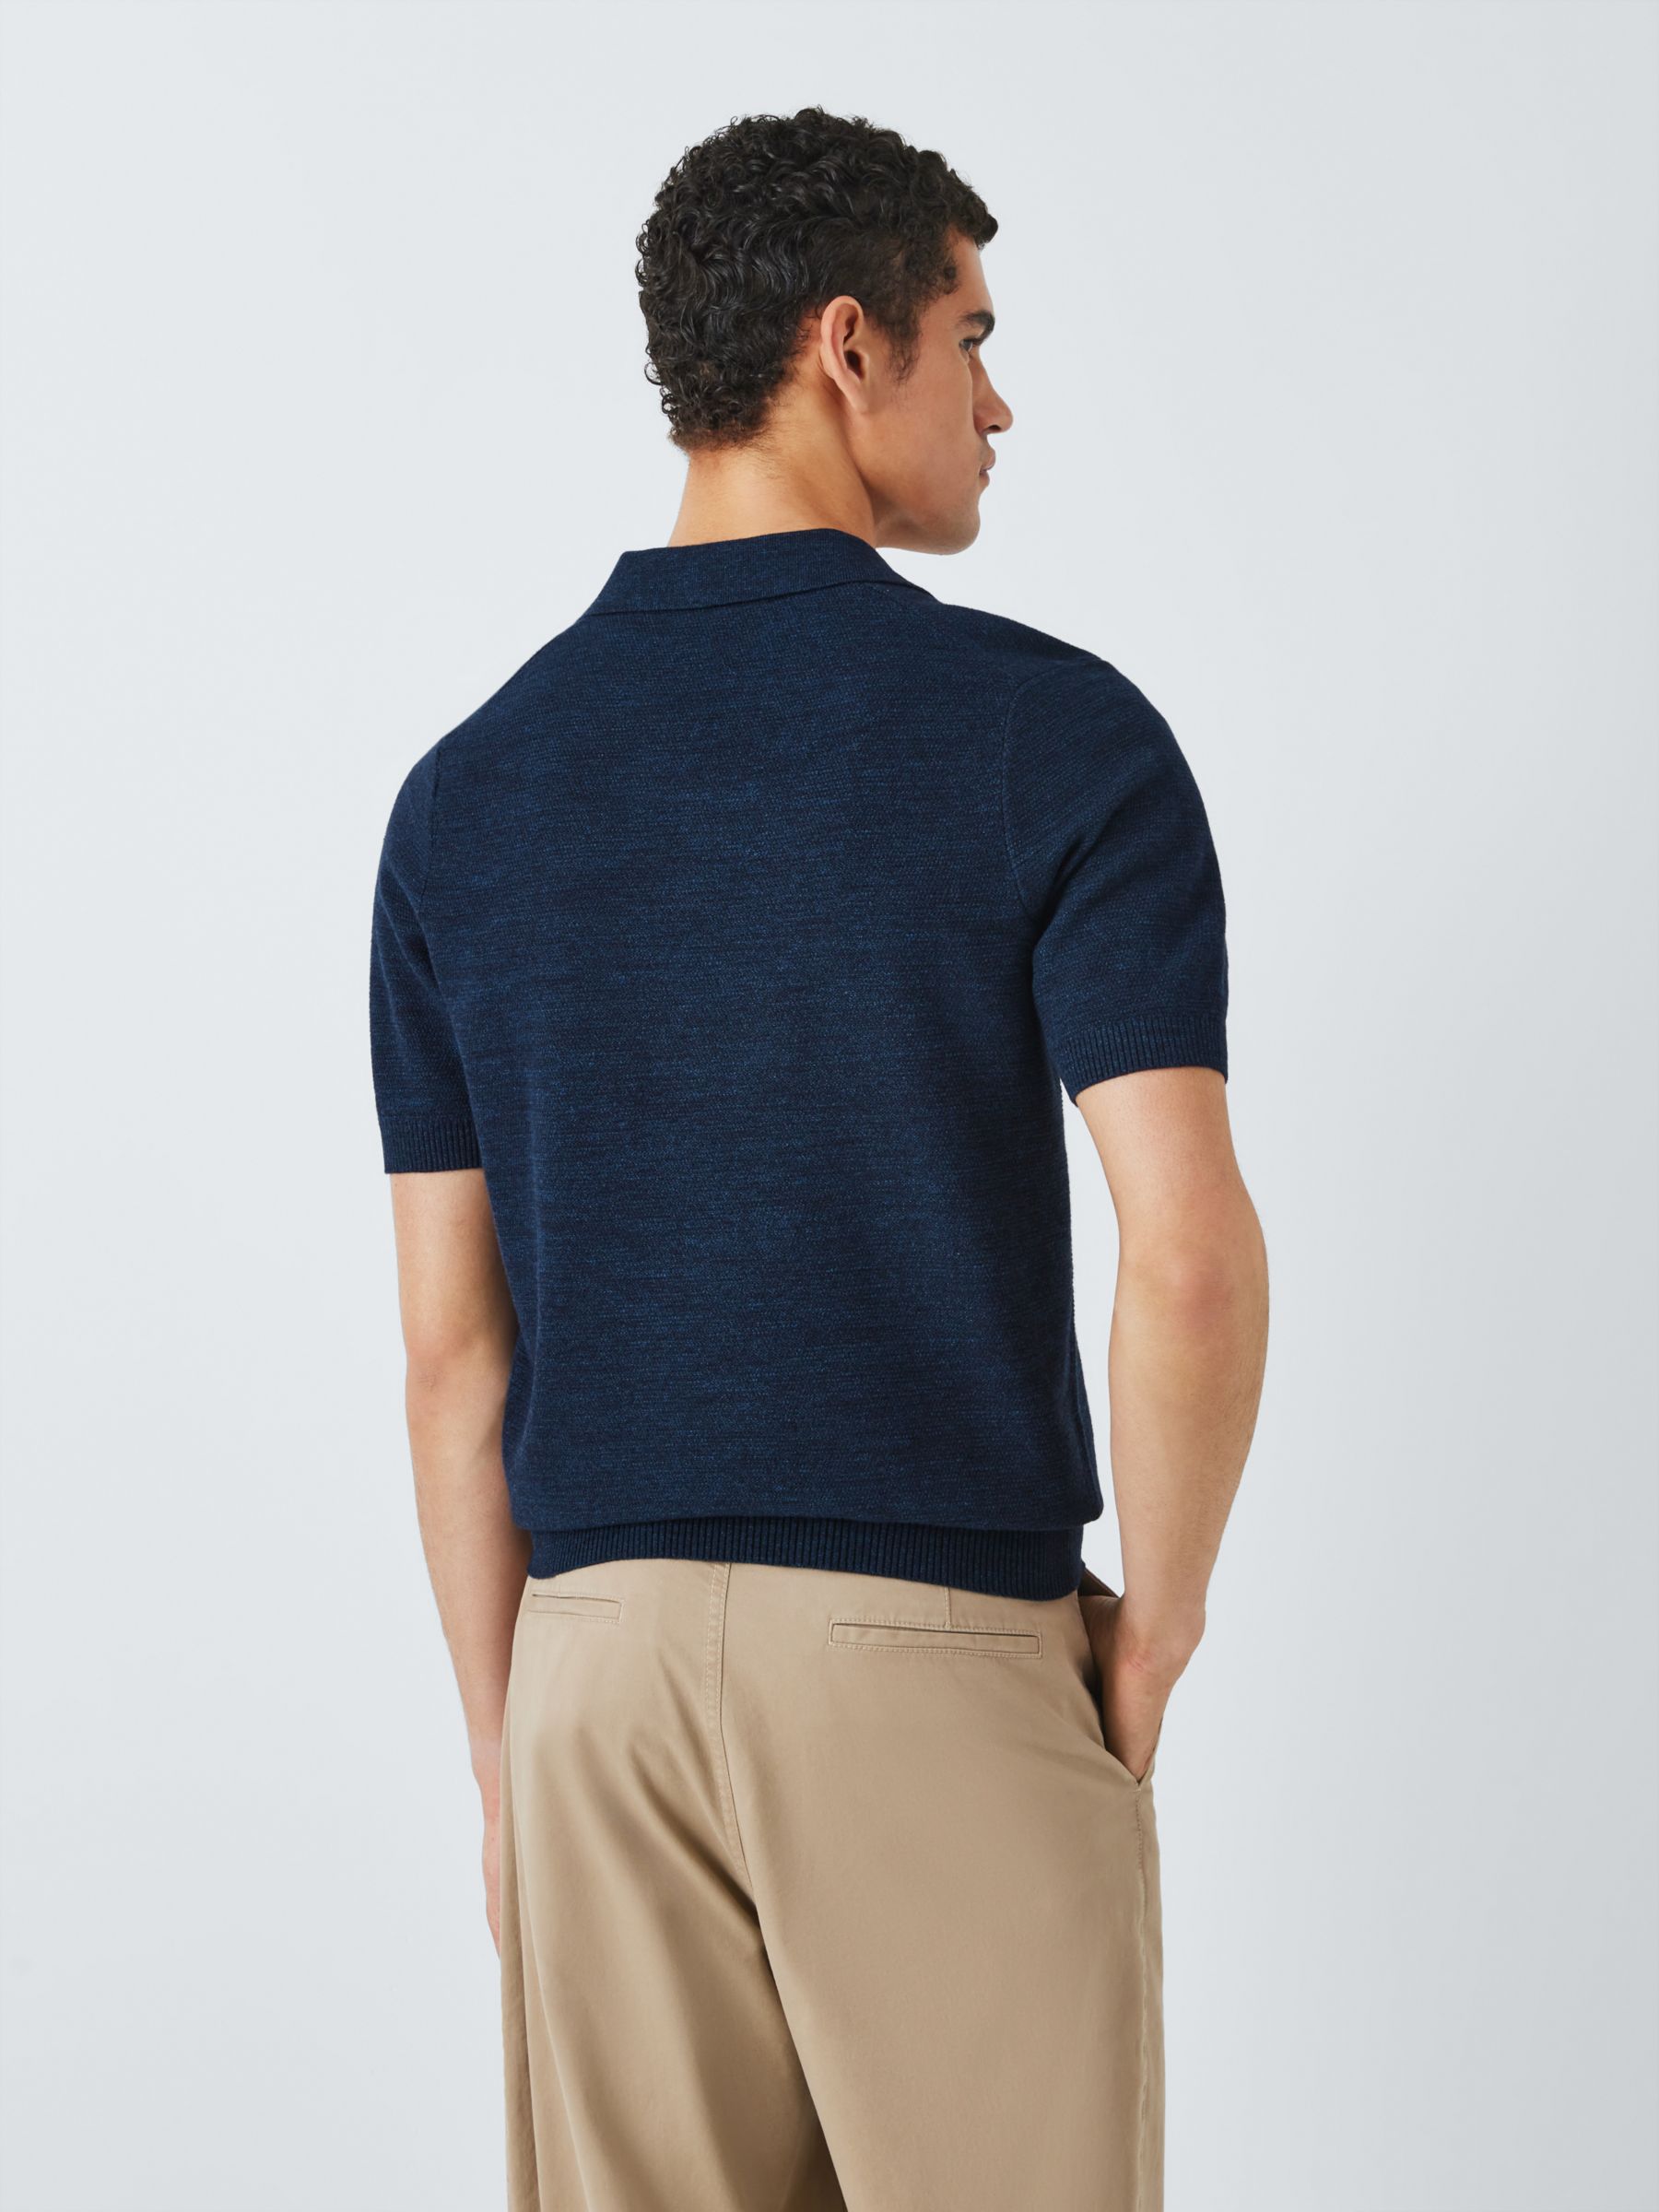 Buy John Lewis Short Sleeve Cotton Textured Knit Polo Online at johnlewis.com